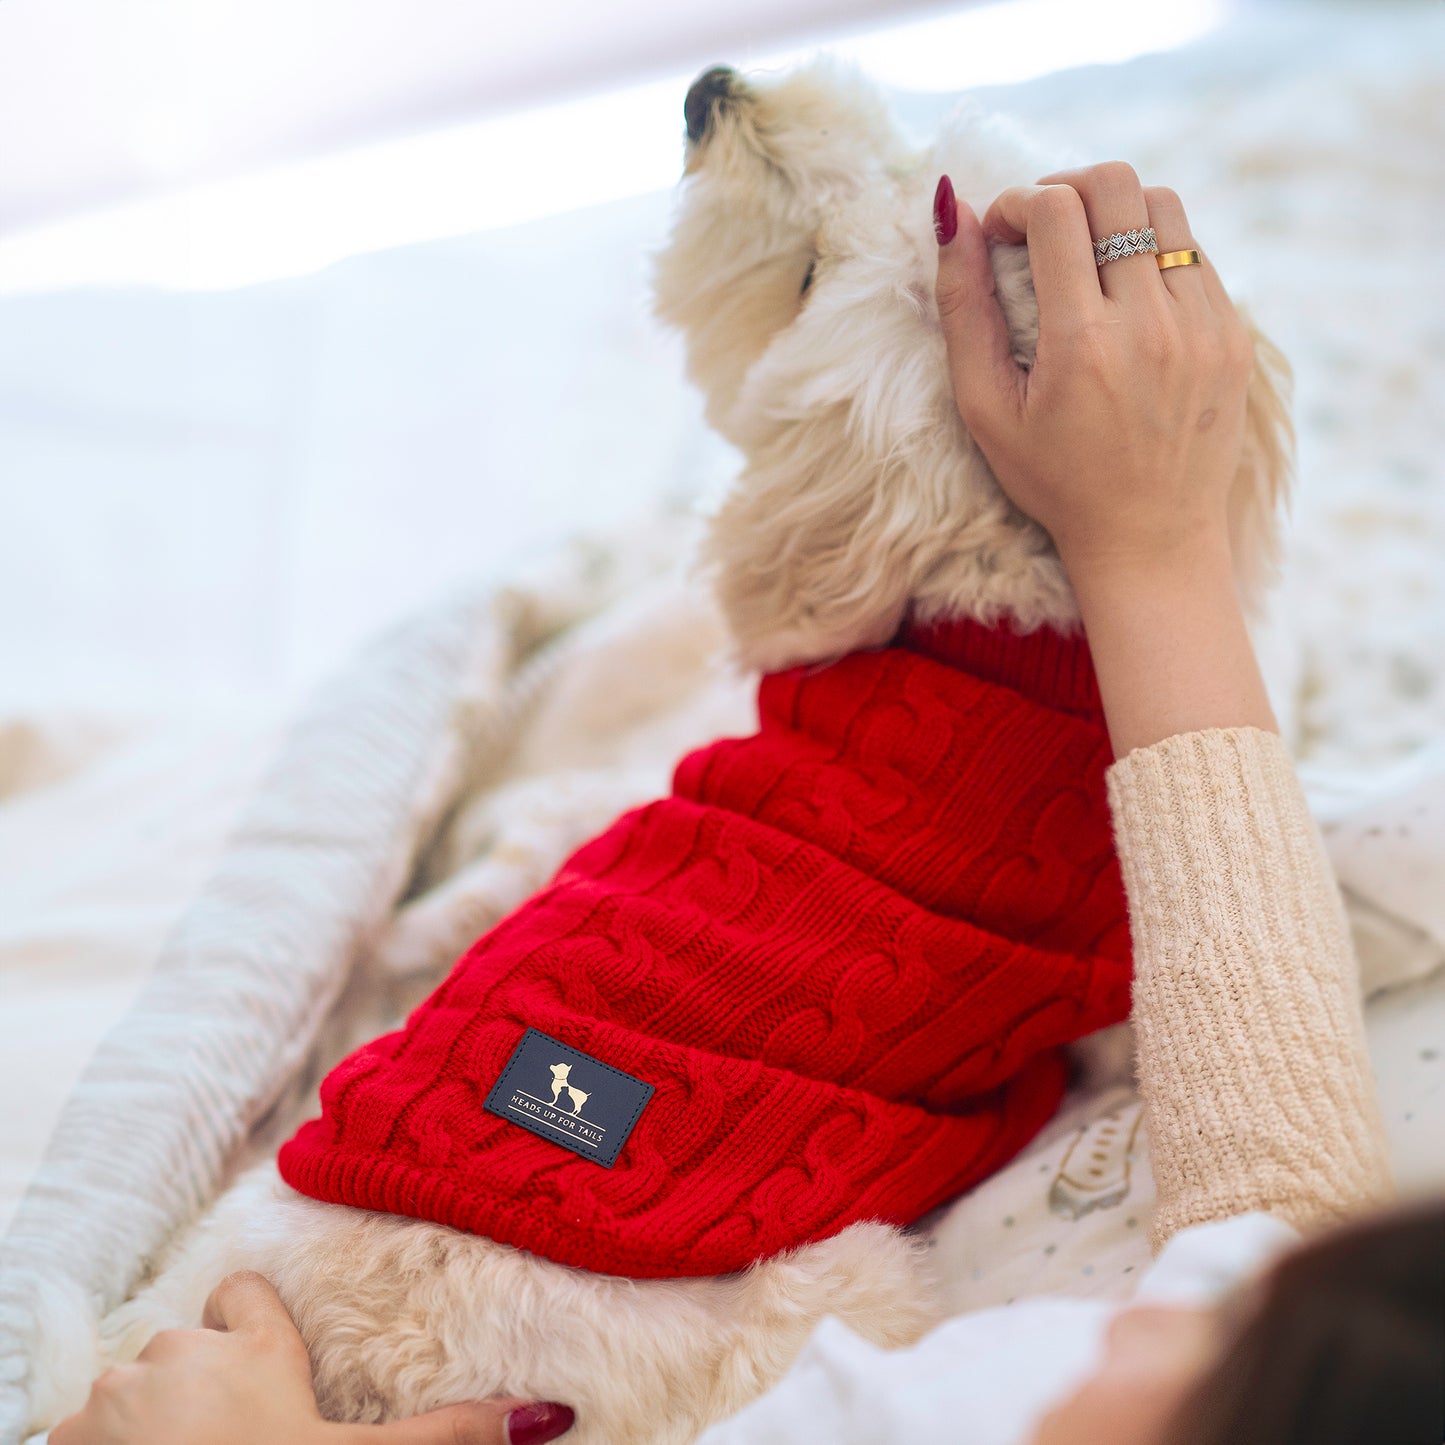 HUFT Cable Knit Sweater For Dog - Red - Heads Up For Tails